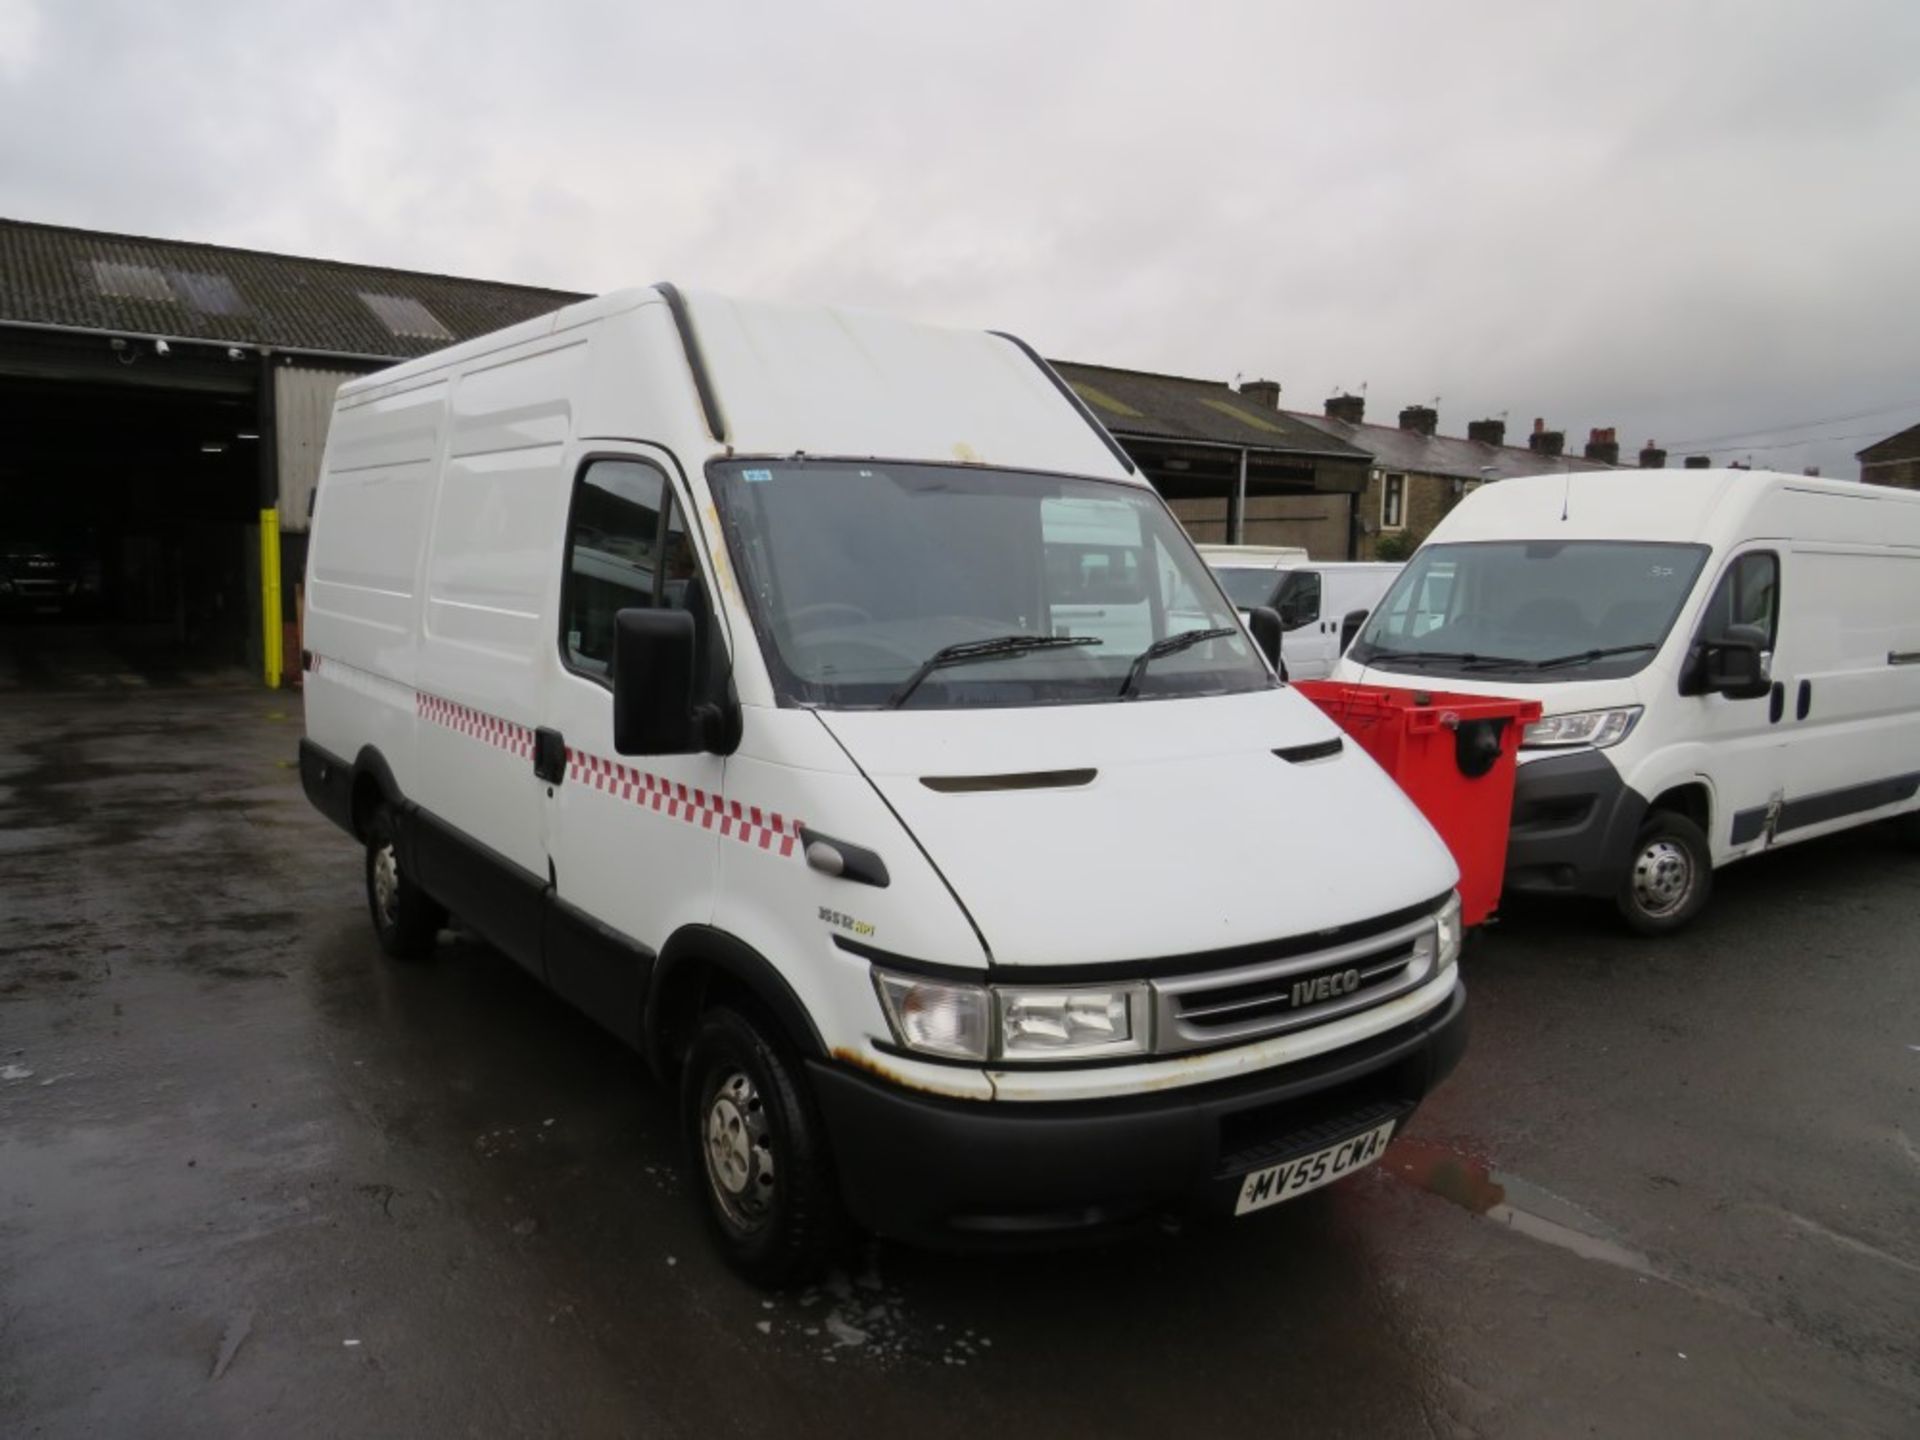 55 reg IVECO DAILY 35S12 MWB (DIRECT GTR M/C FIRE) 1ST REG 02/06, 119550M, V5 HERE, 1 OWNER FROM NEW